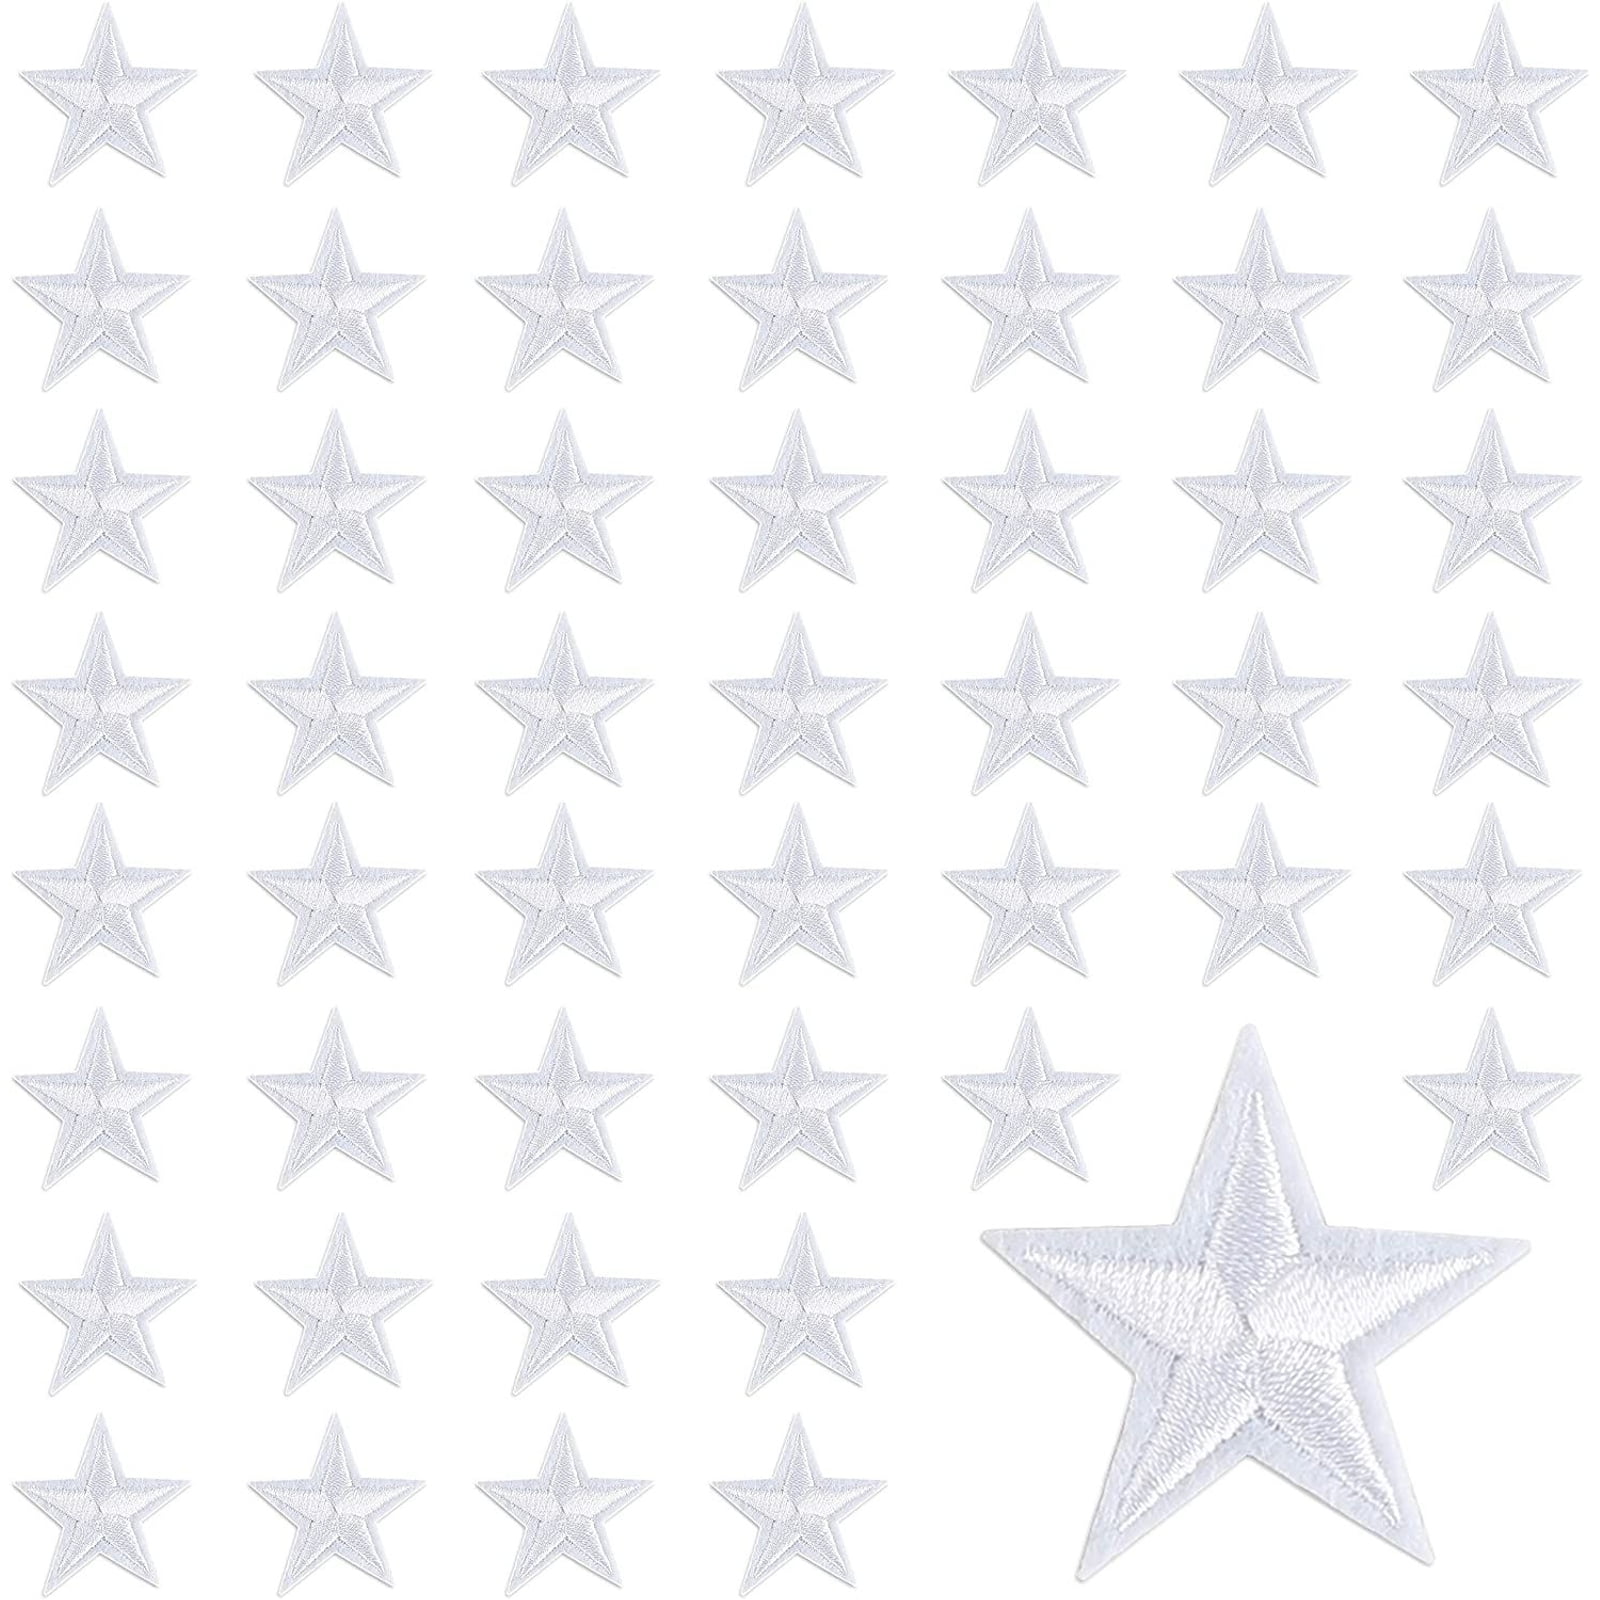 10PCS Star Patch Embroidered Sew On Iron On Badge Clothes Fabric Applique Craft 